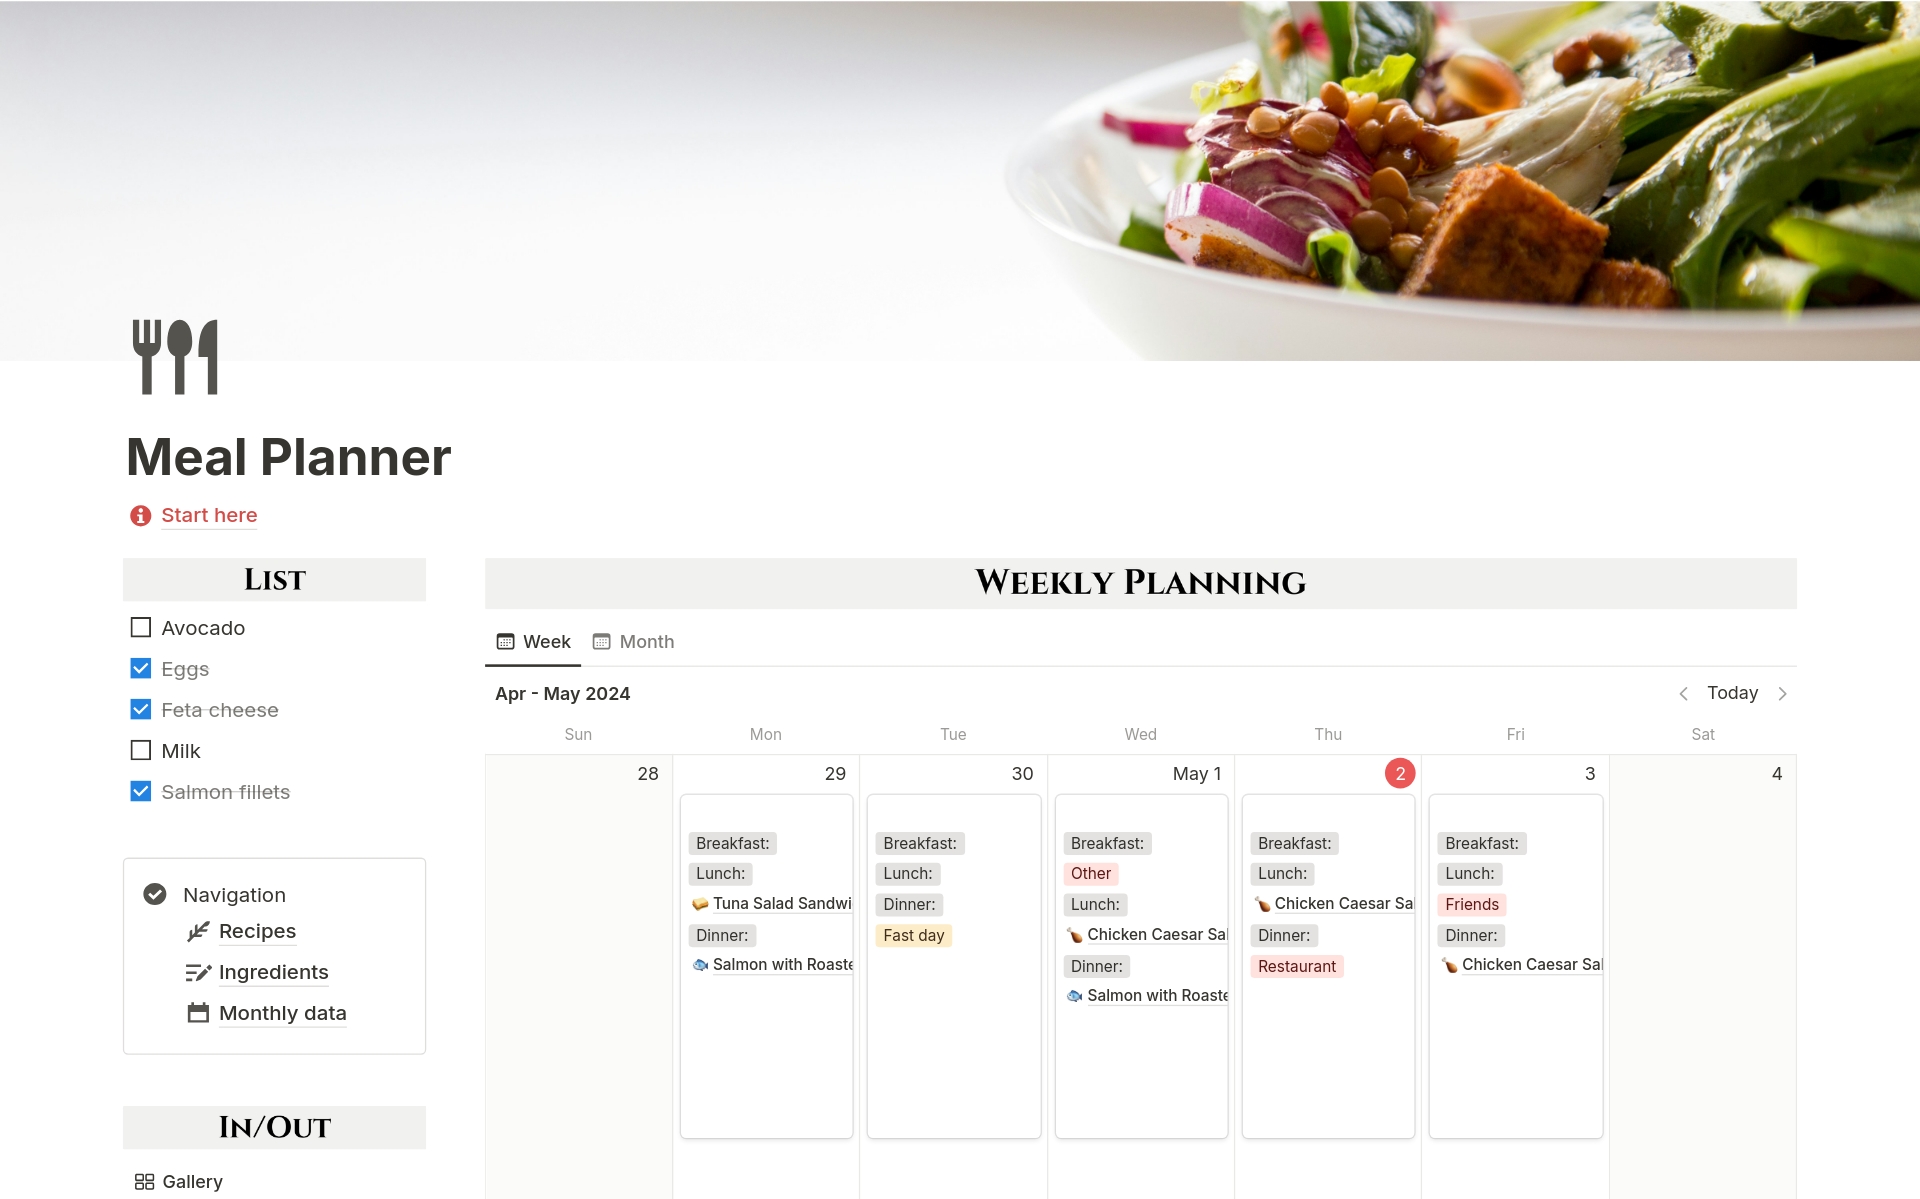 This template can rescue your dinner routine! Plan delicious weekly & monthly meals with recipes, ingredients & tips. Build grocery lists & track eating habits - see how often you cook at home, eat out or fast. Take control of your health & budget, all while saving time! 